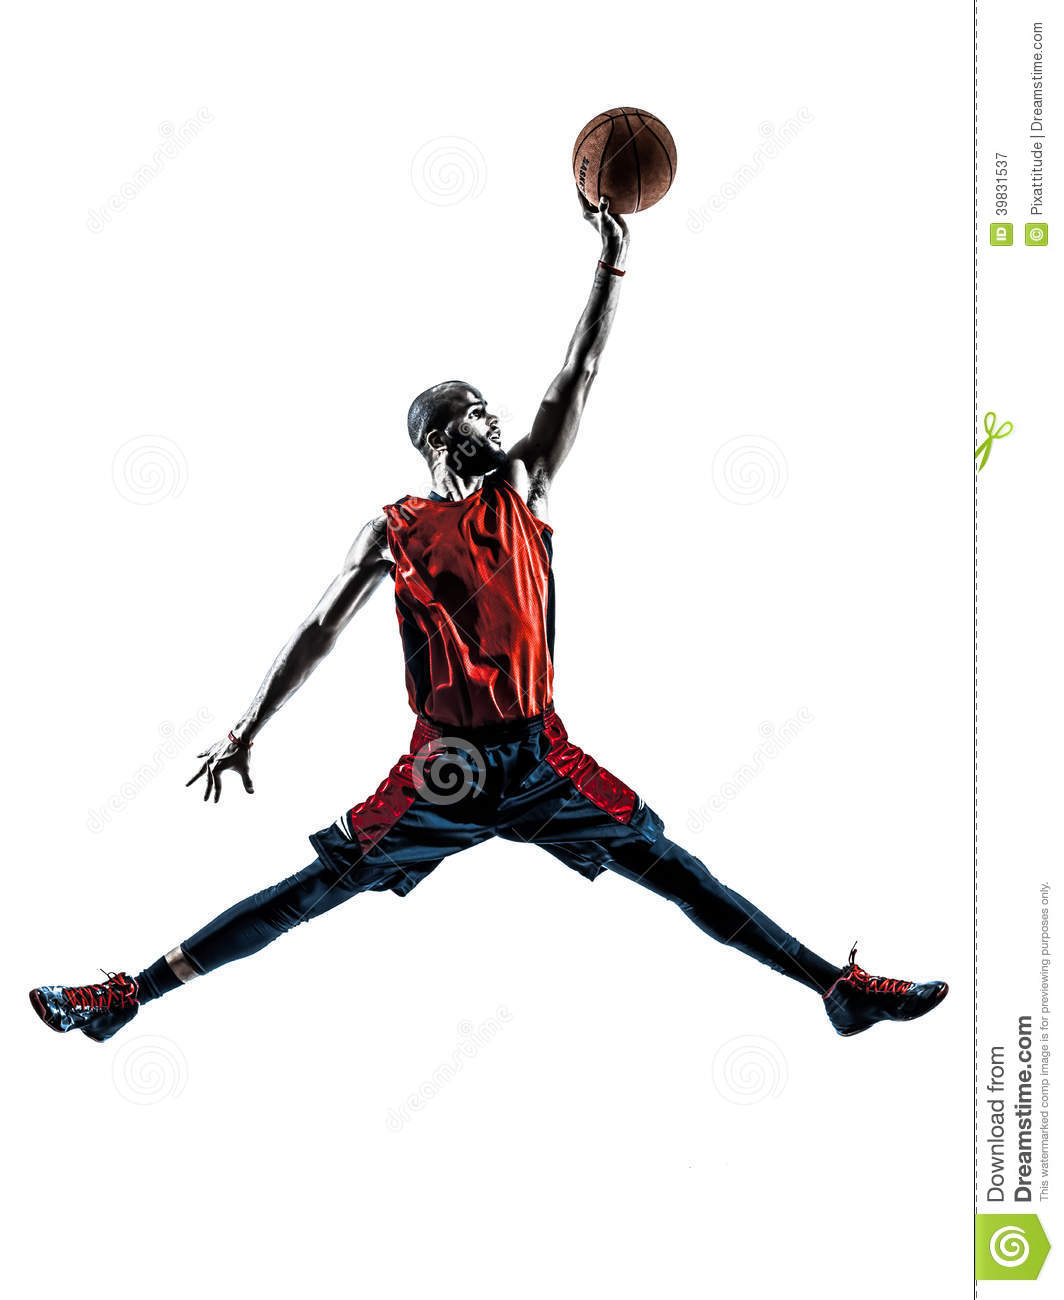 African Man Basketball Player Jumping Dunking Silhouette Stock Photo